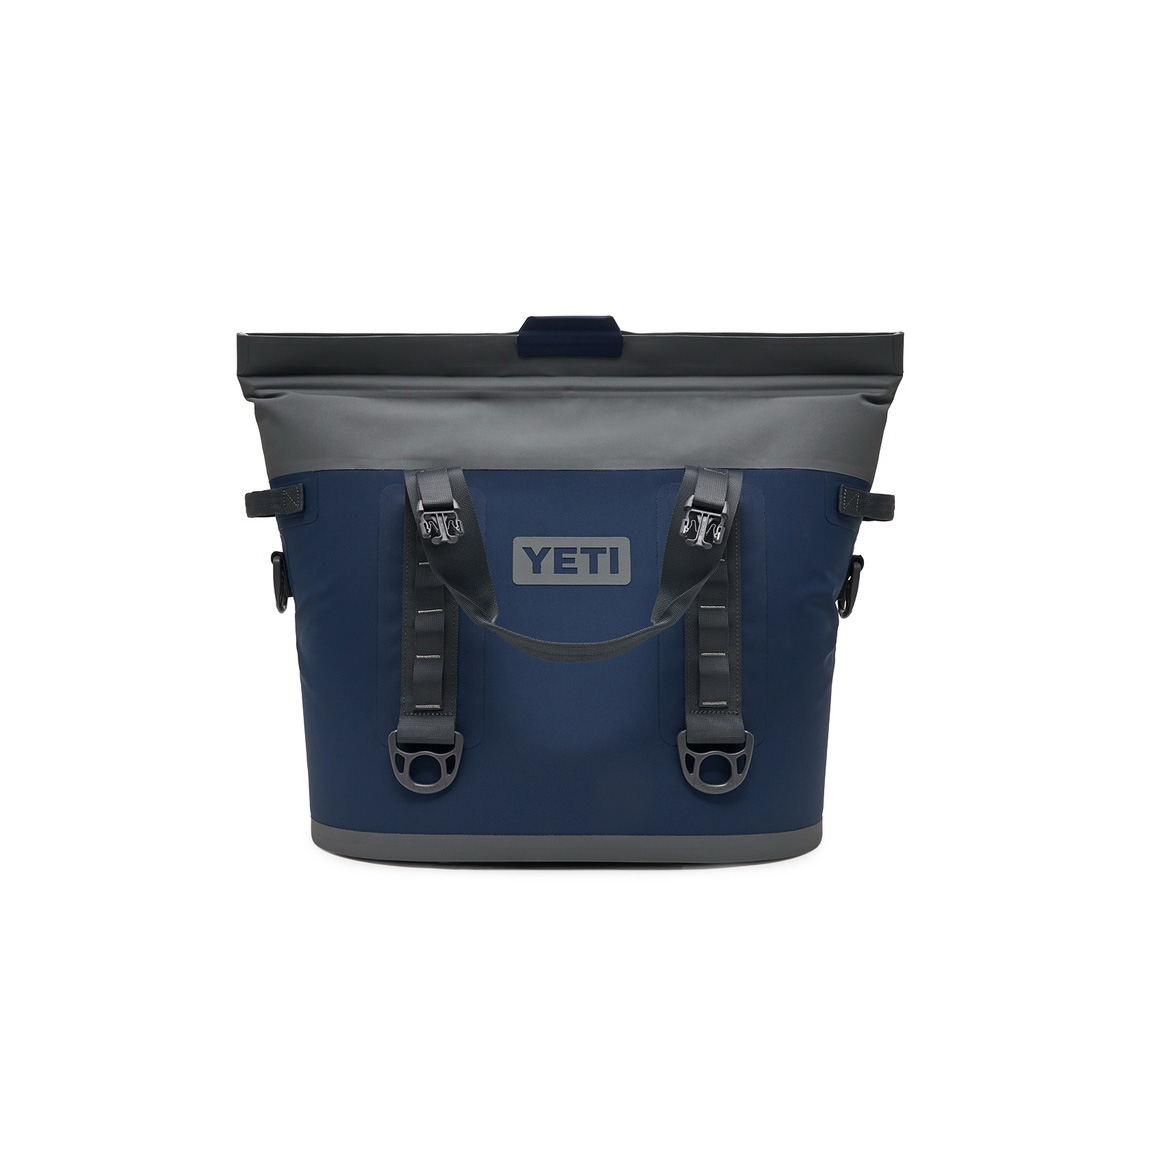 YETI 18025180000 Cooler, 20 Cans Capacity, Navy - 2